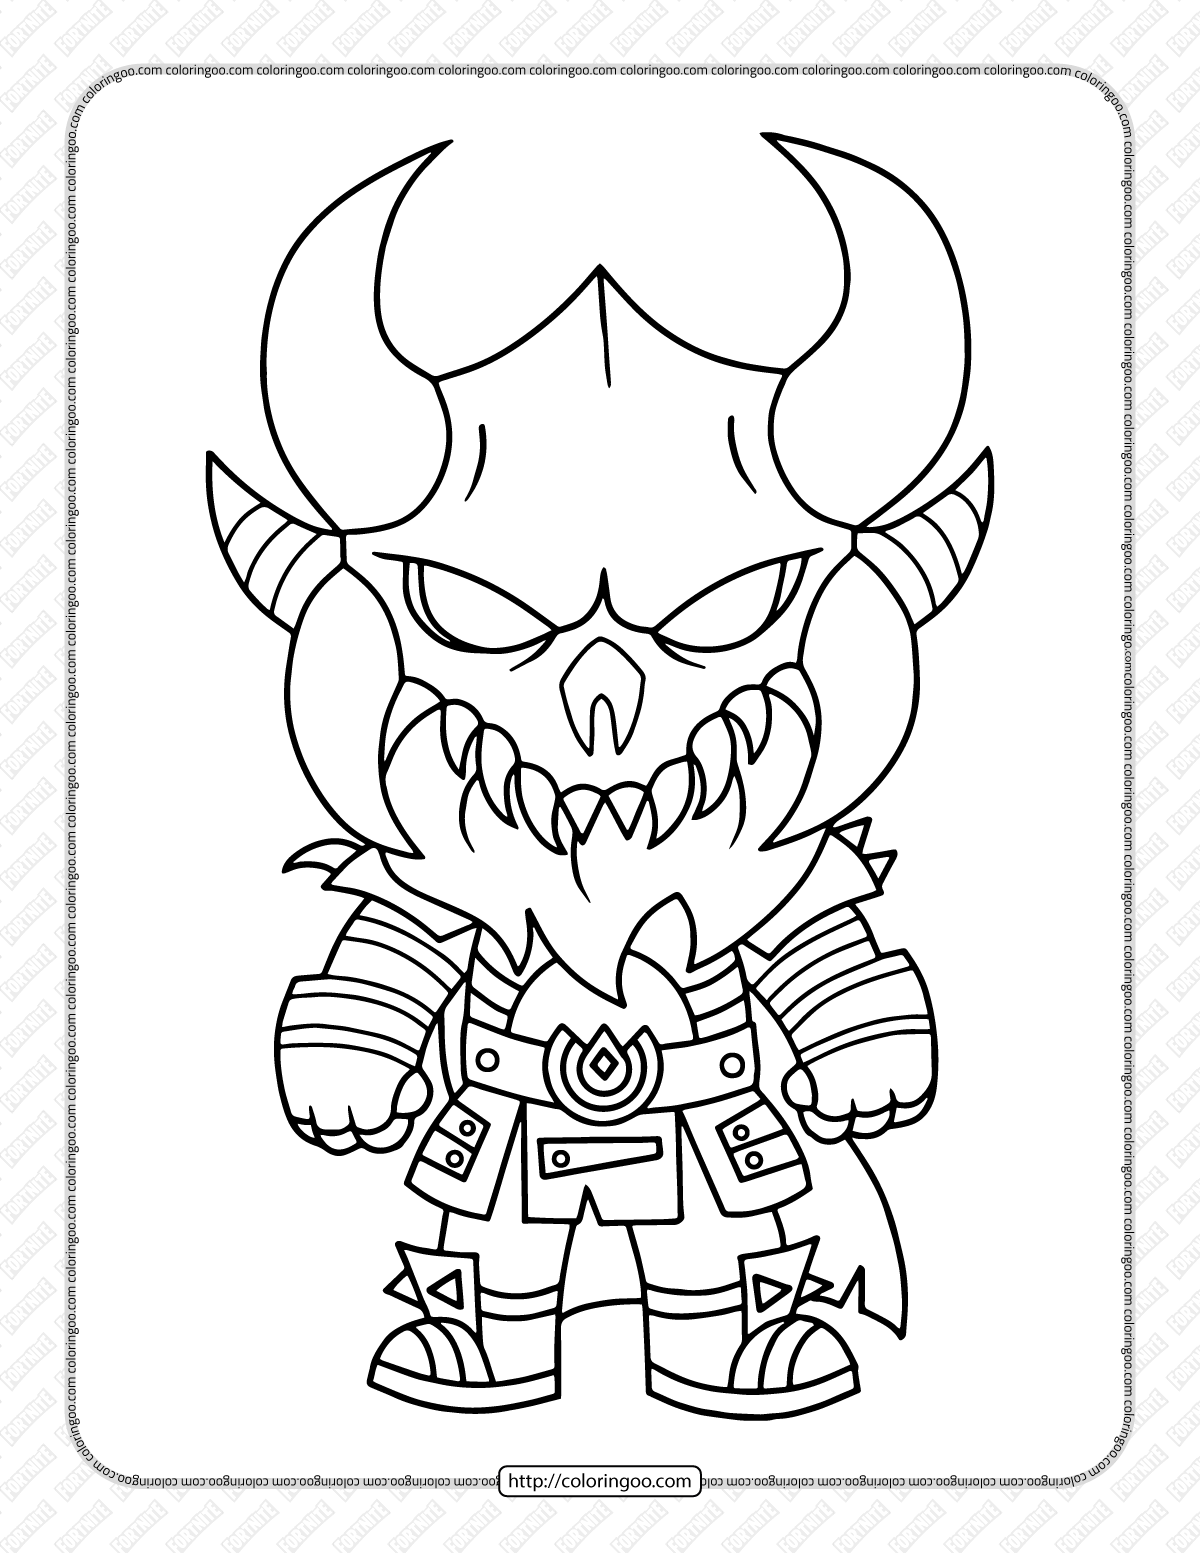 chibi fortnite coloring pages 19